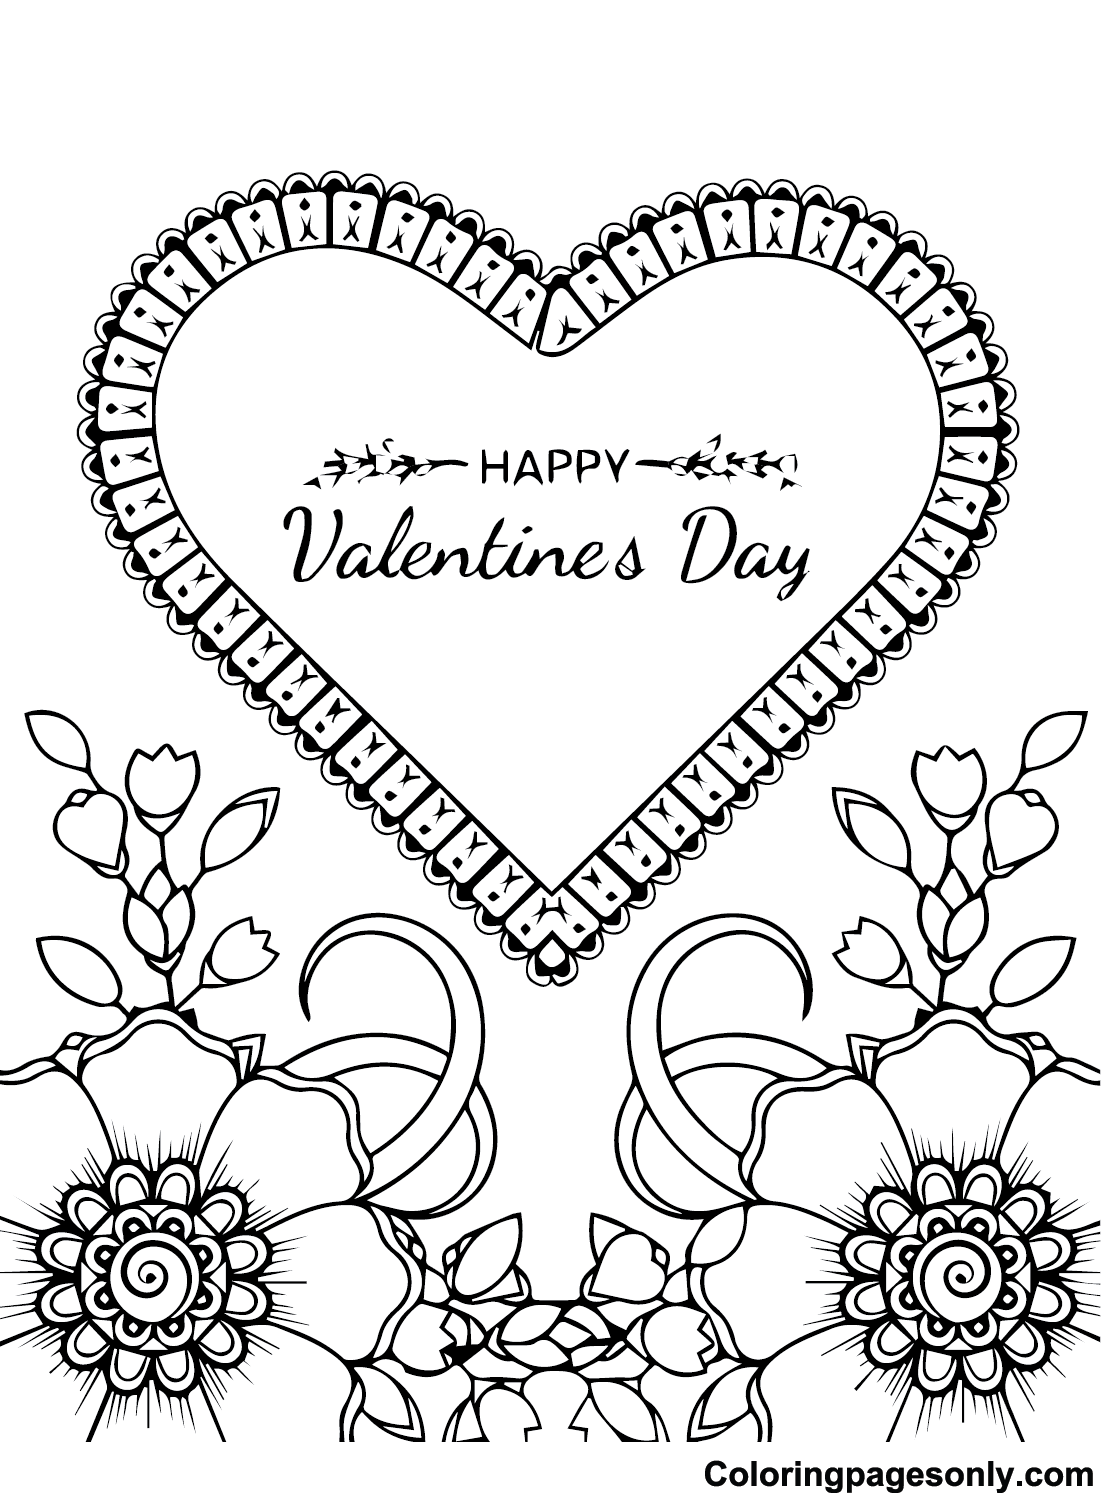 Pictures Valentines Day Cards Coloring Page